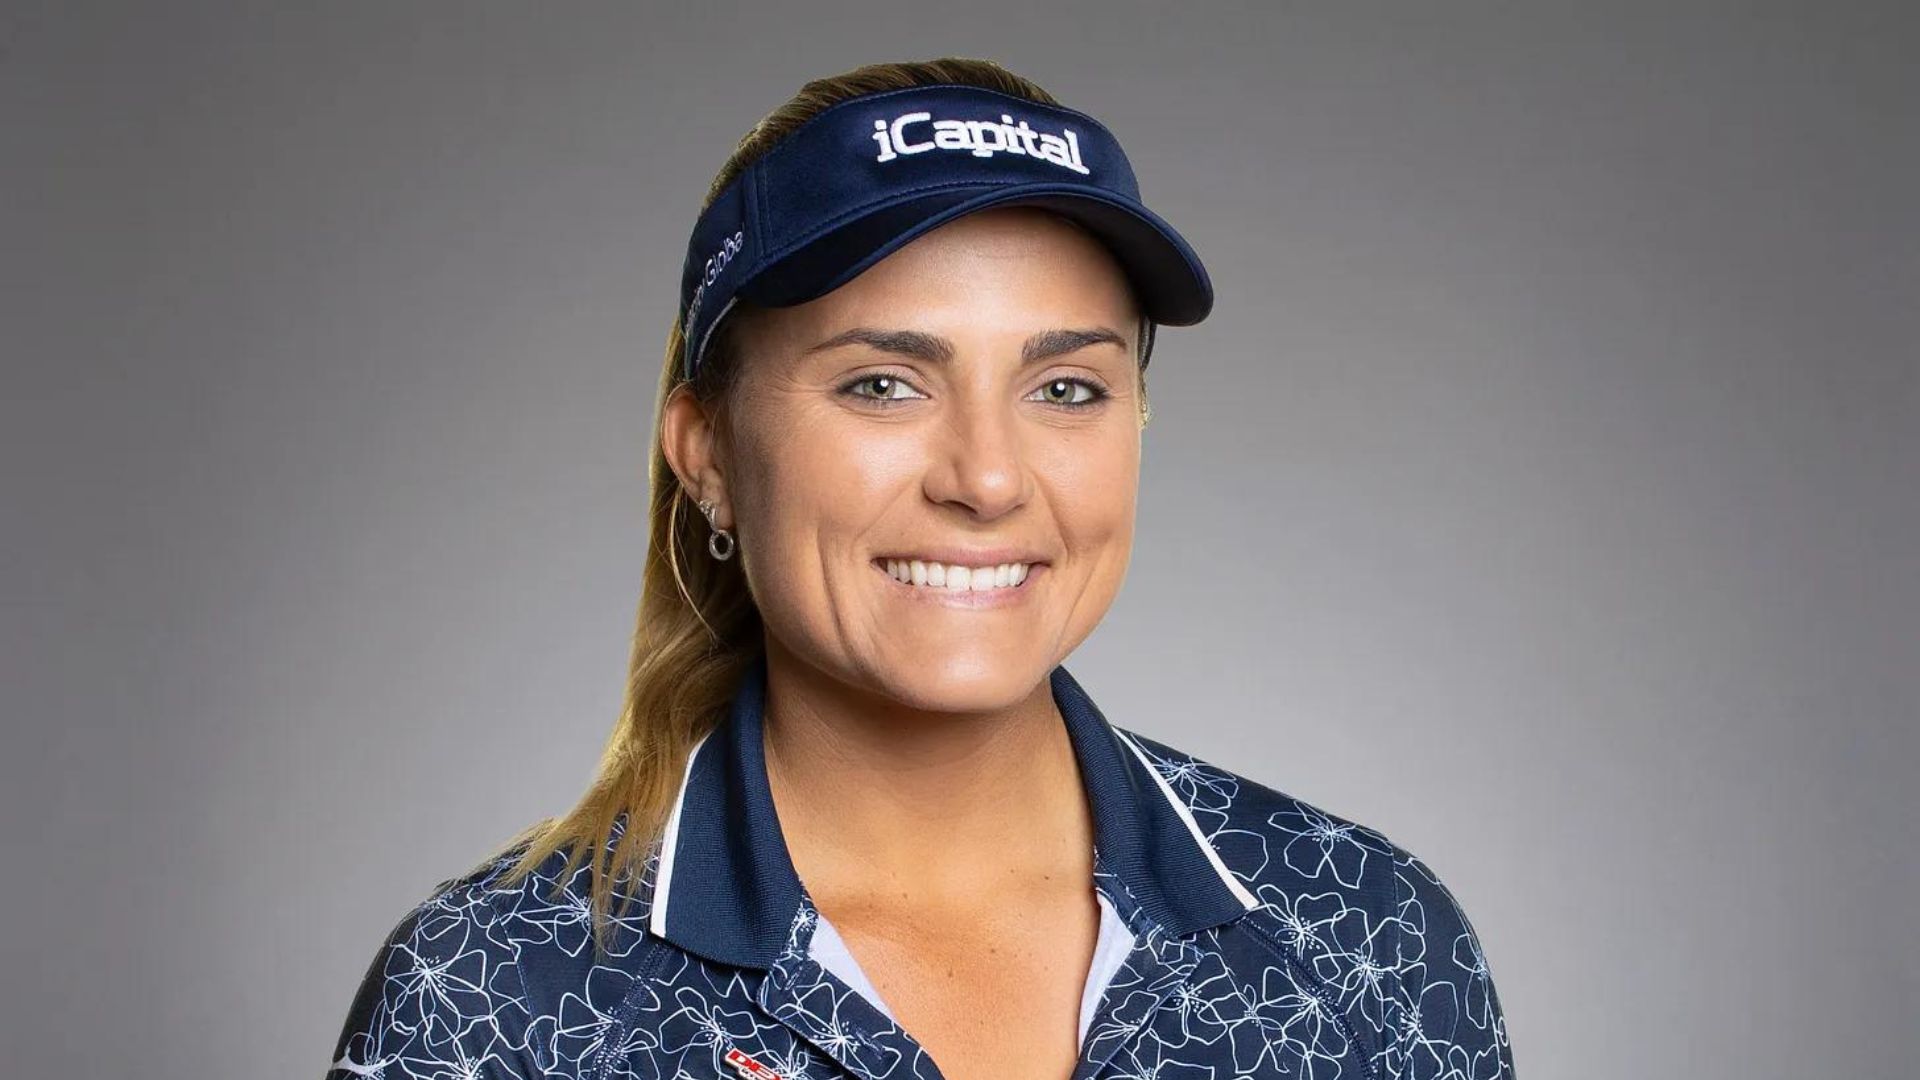 Lexi Thompson's Husband And Why Fowler Picked Her For Grant Thornton